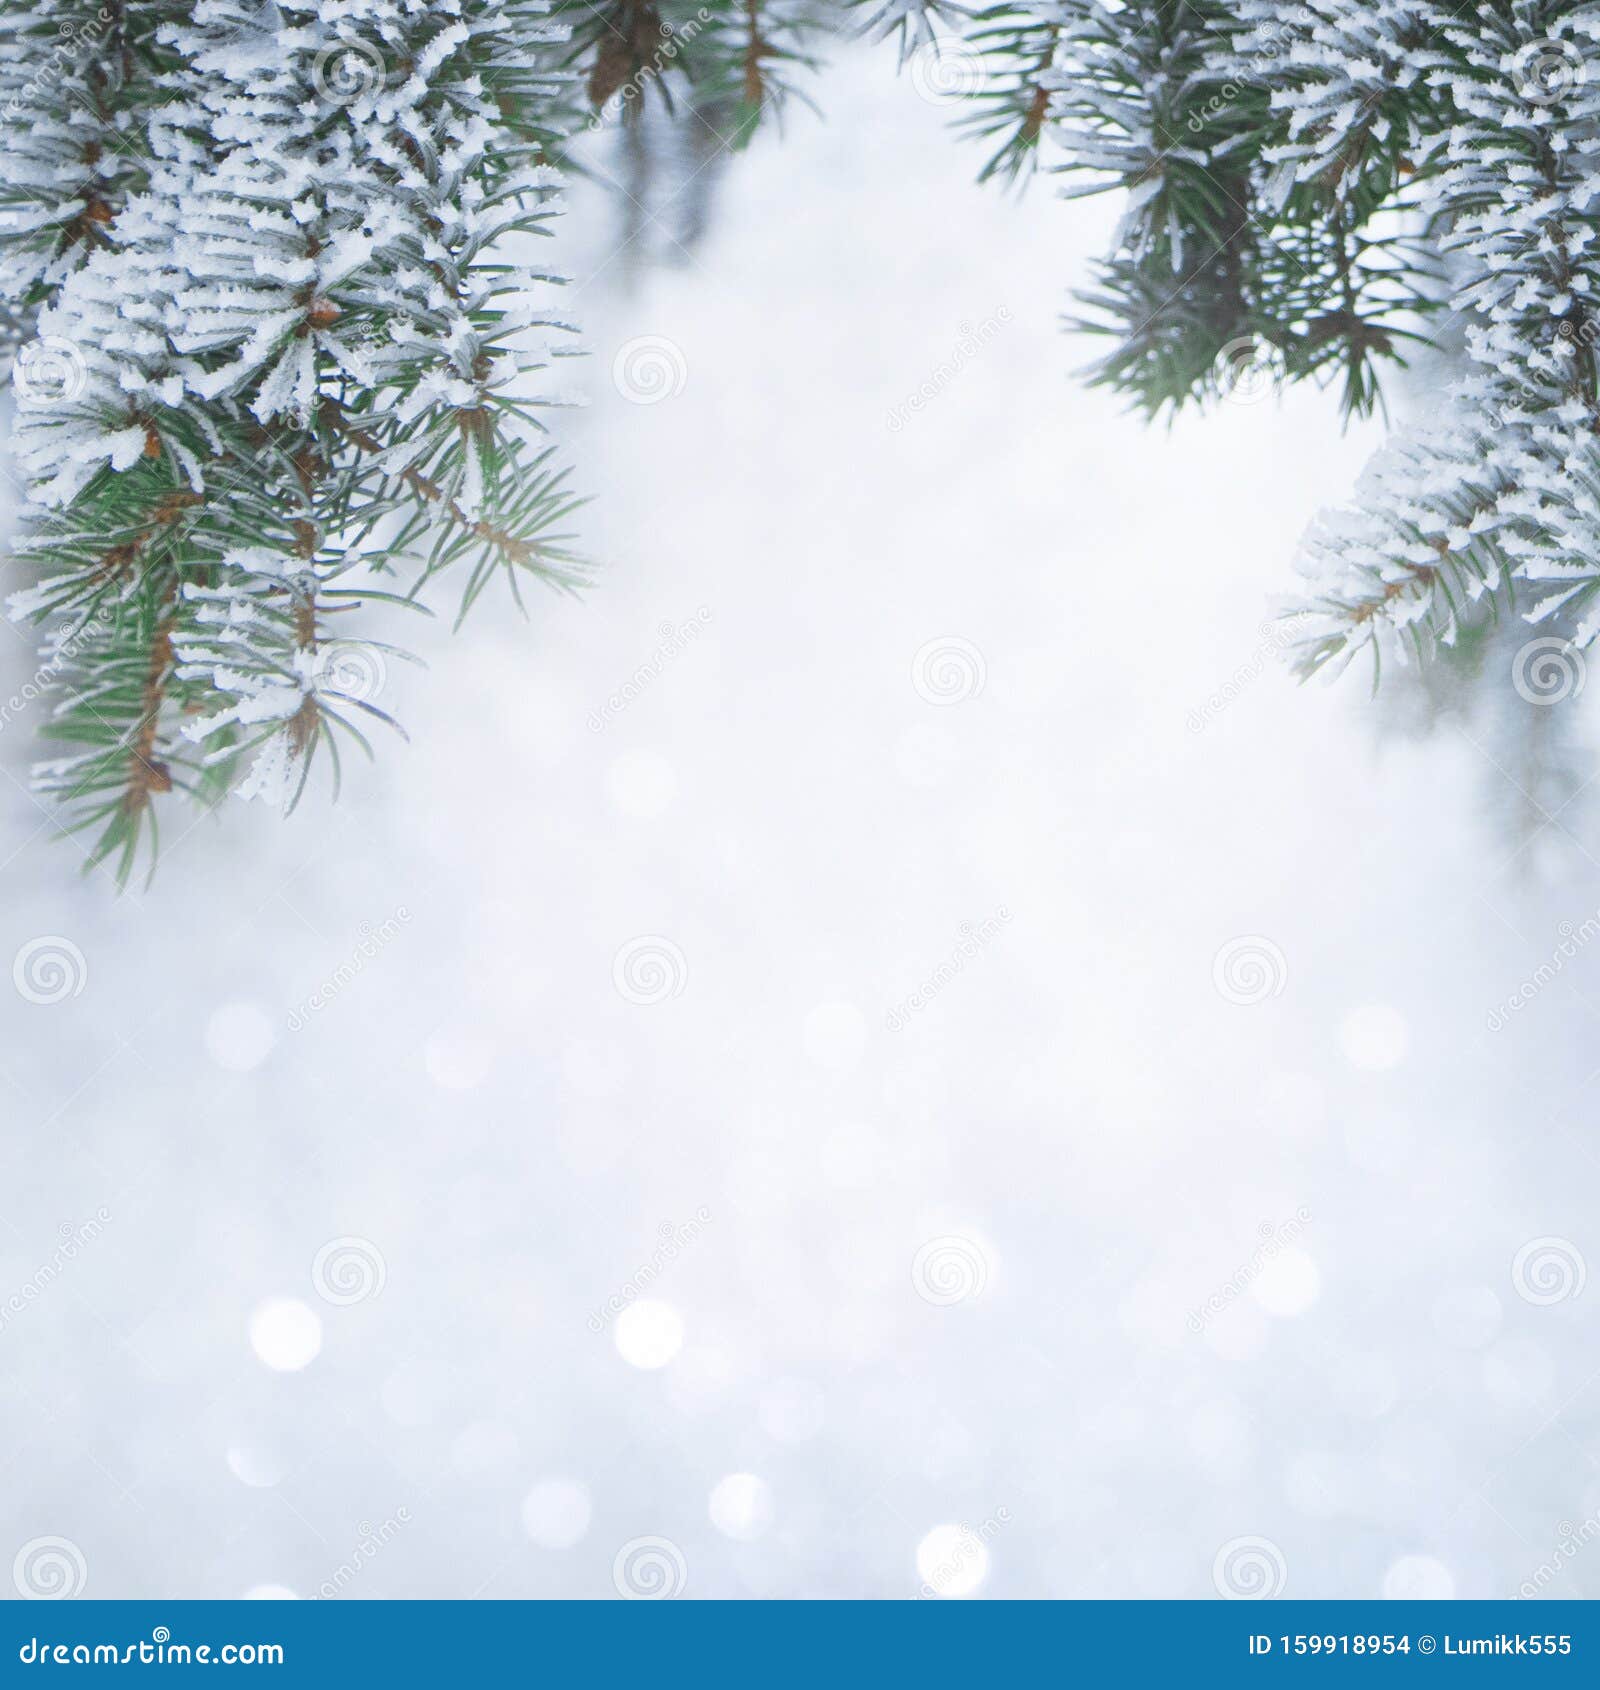 Nature Winter Background Snowy Pine Tree Stock Photo Image of abstract, outside: 159918954